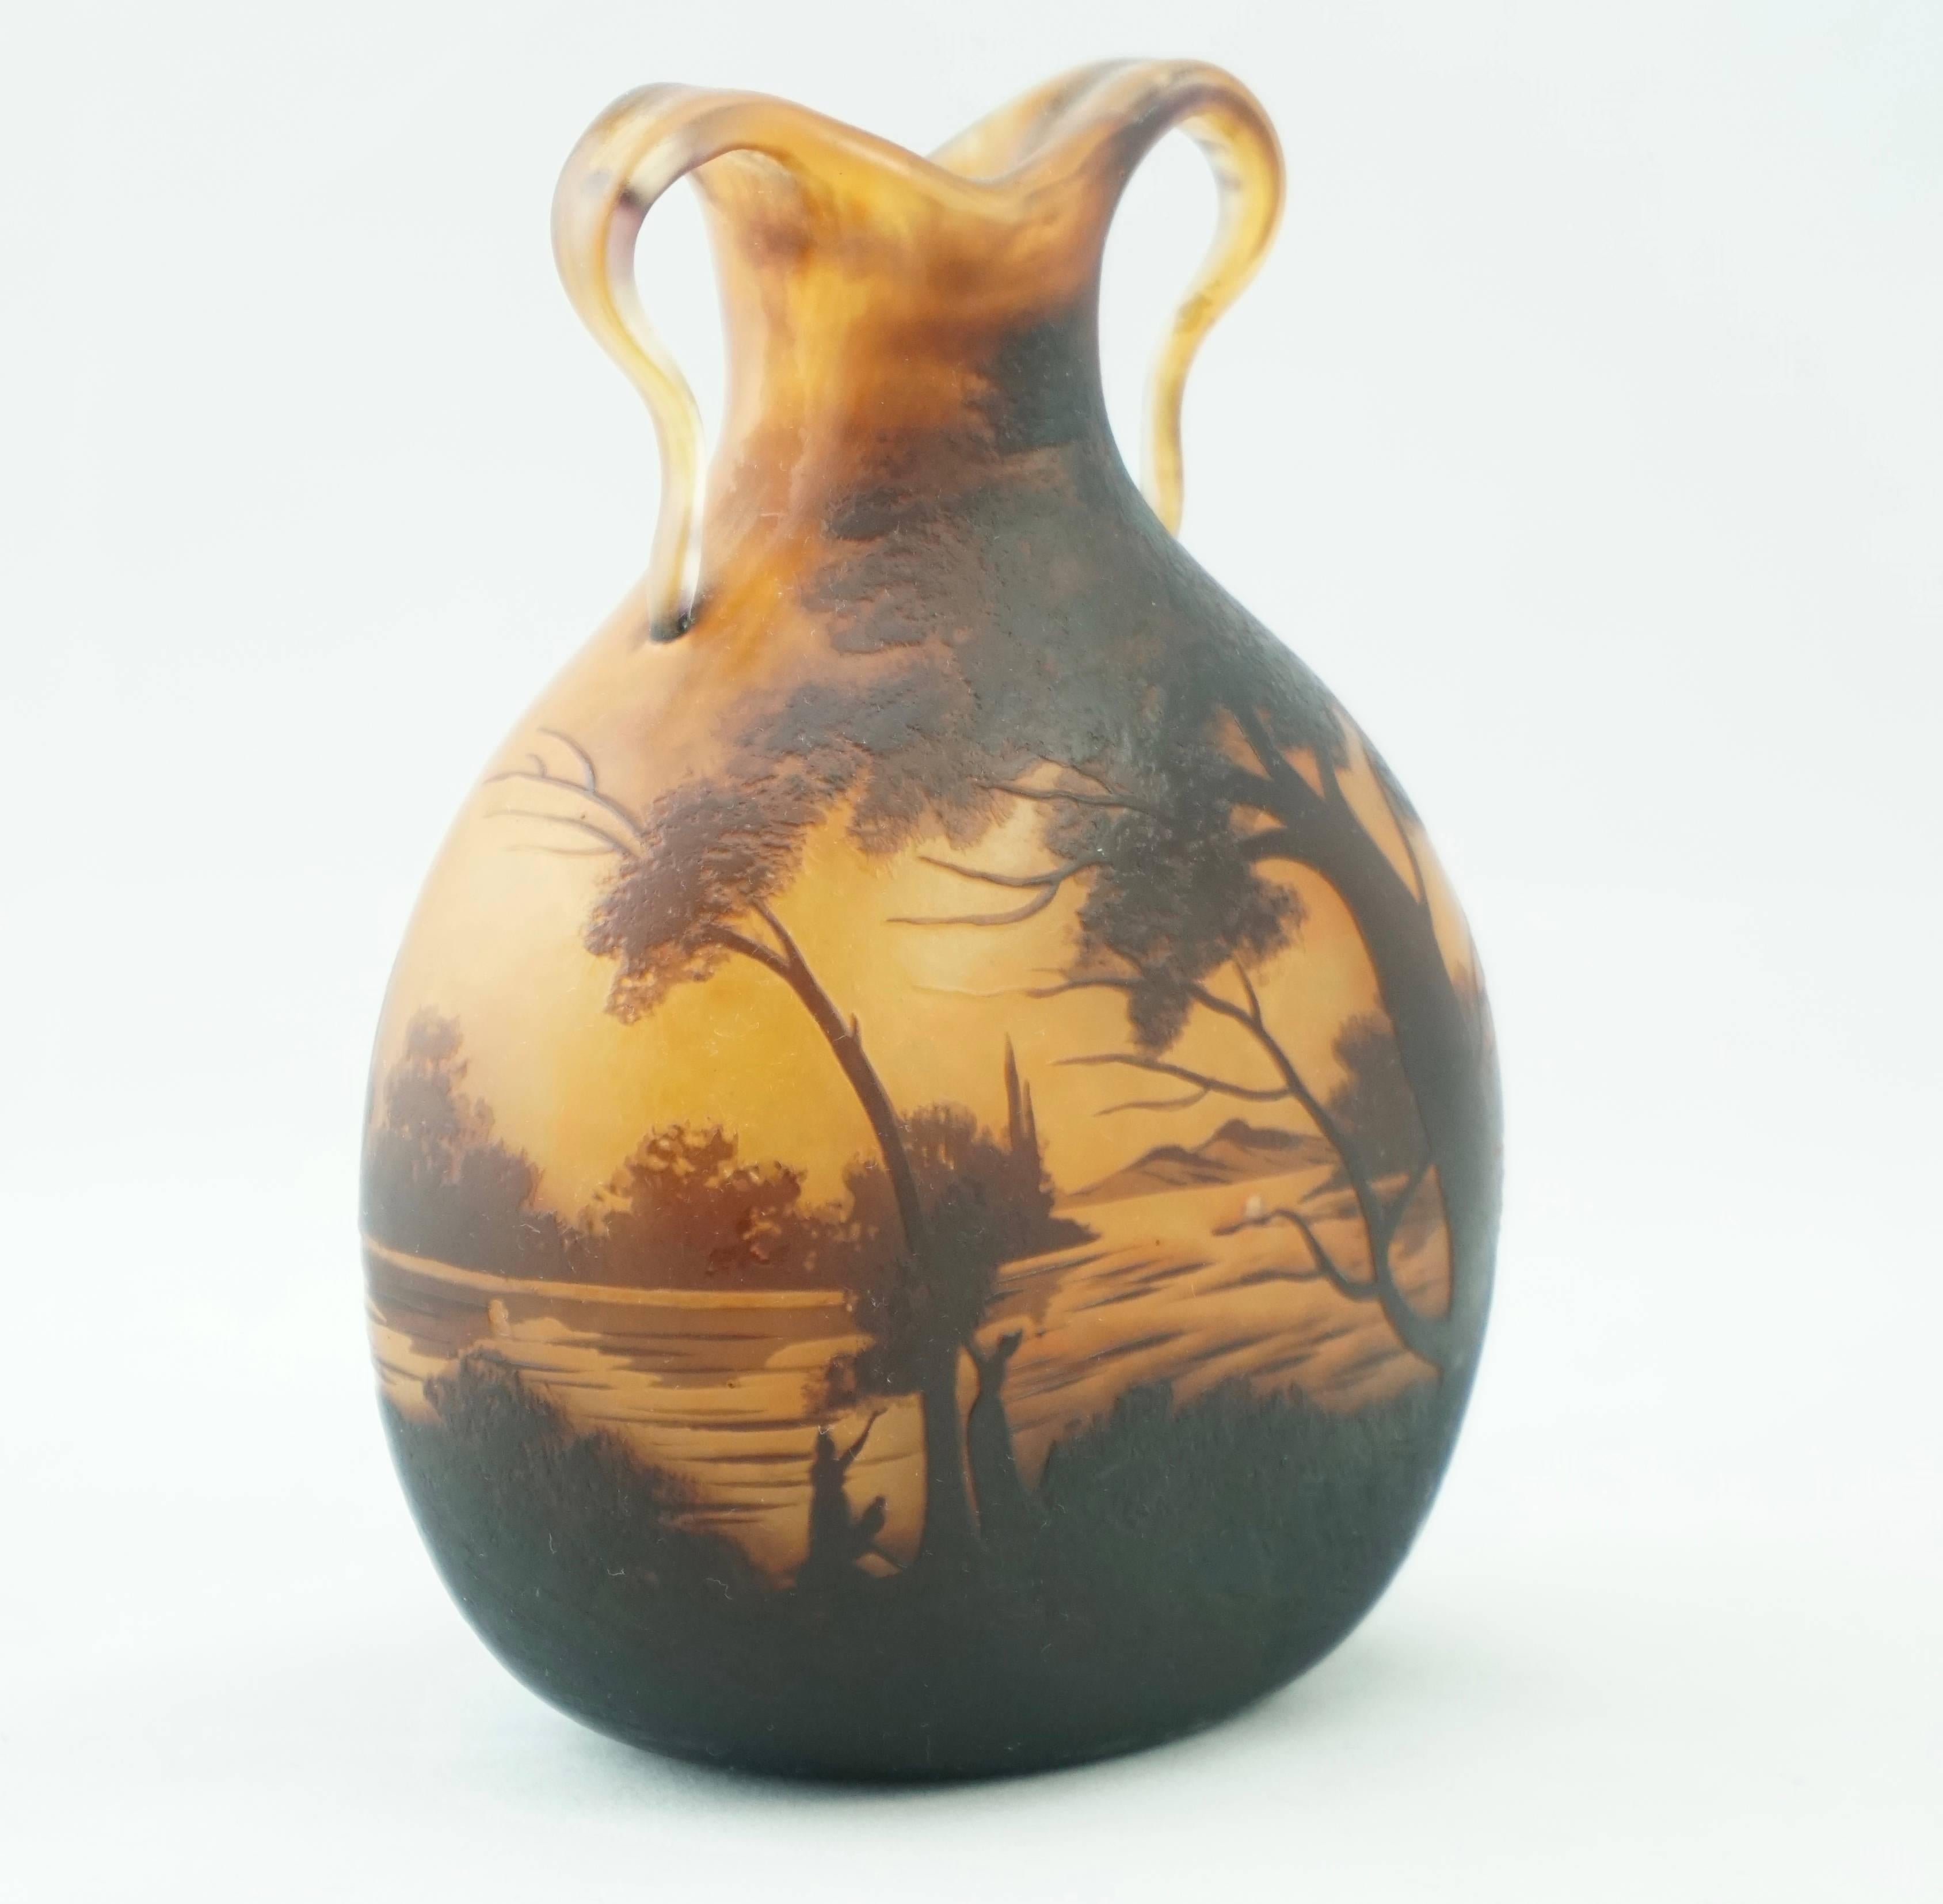 Muller Freres Luneville Cameo Landscape vase 1900 In Excellent Condition For Sale In Dallas, TX